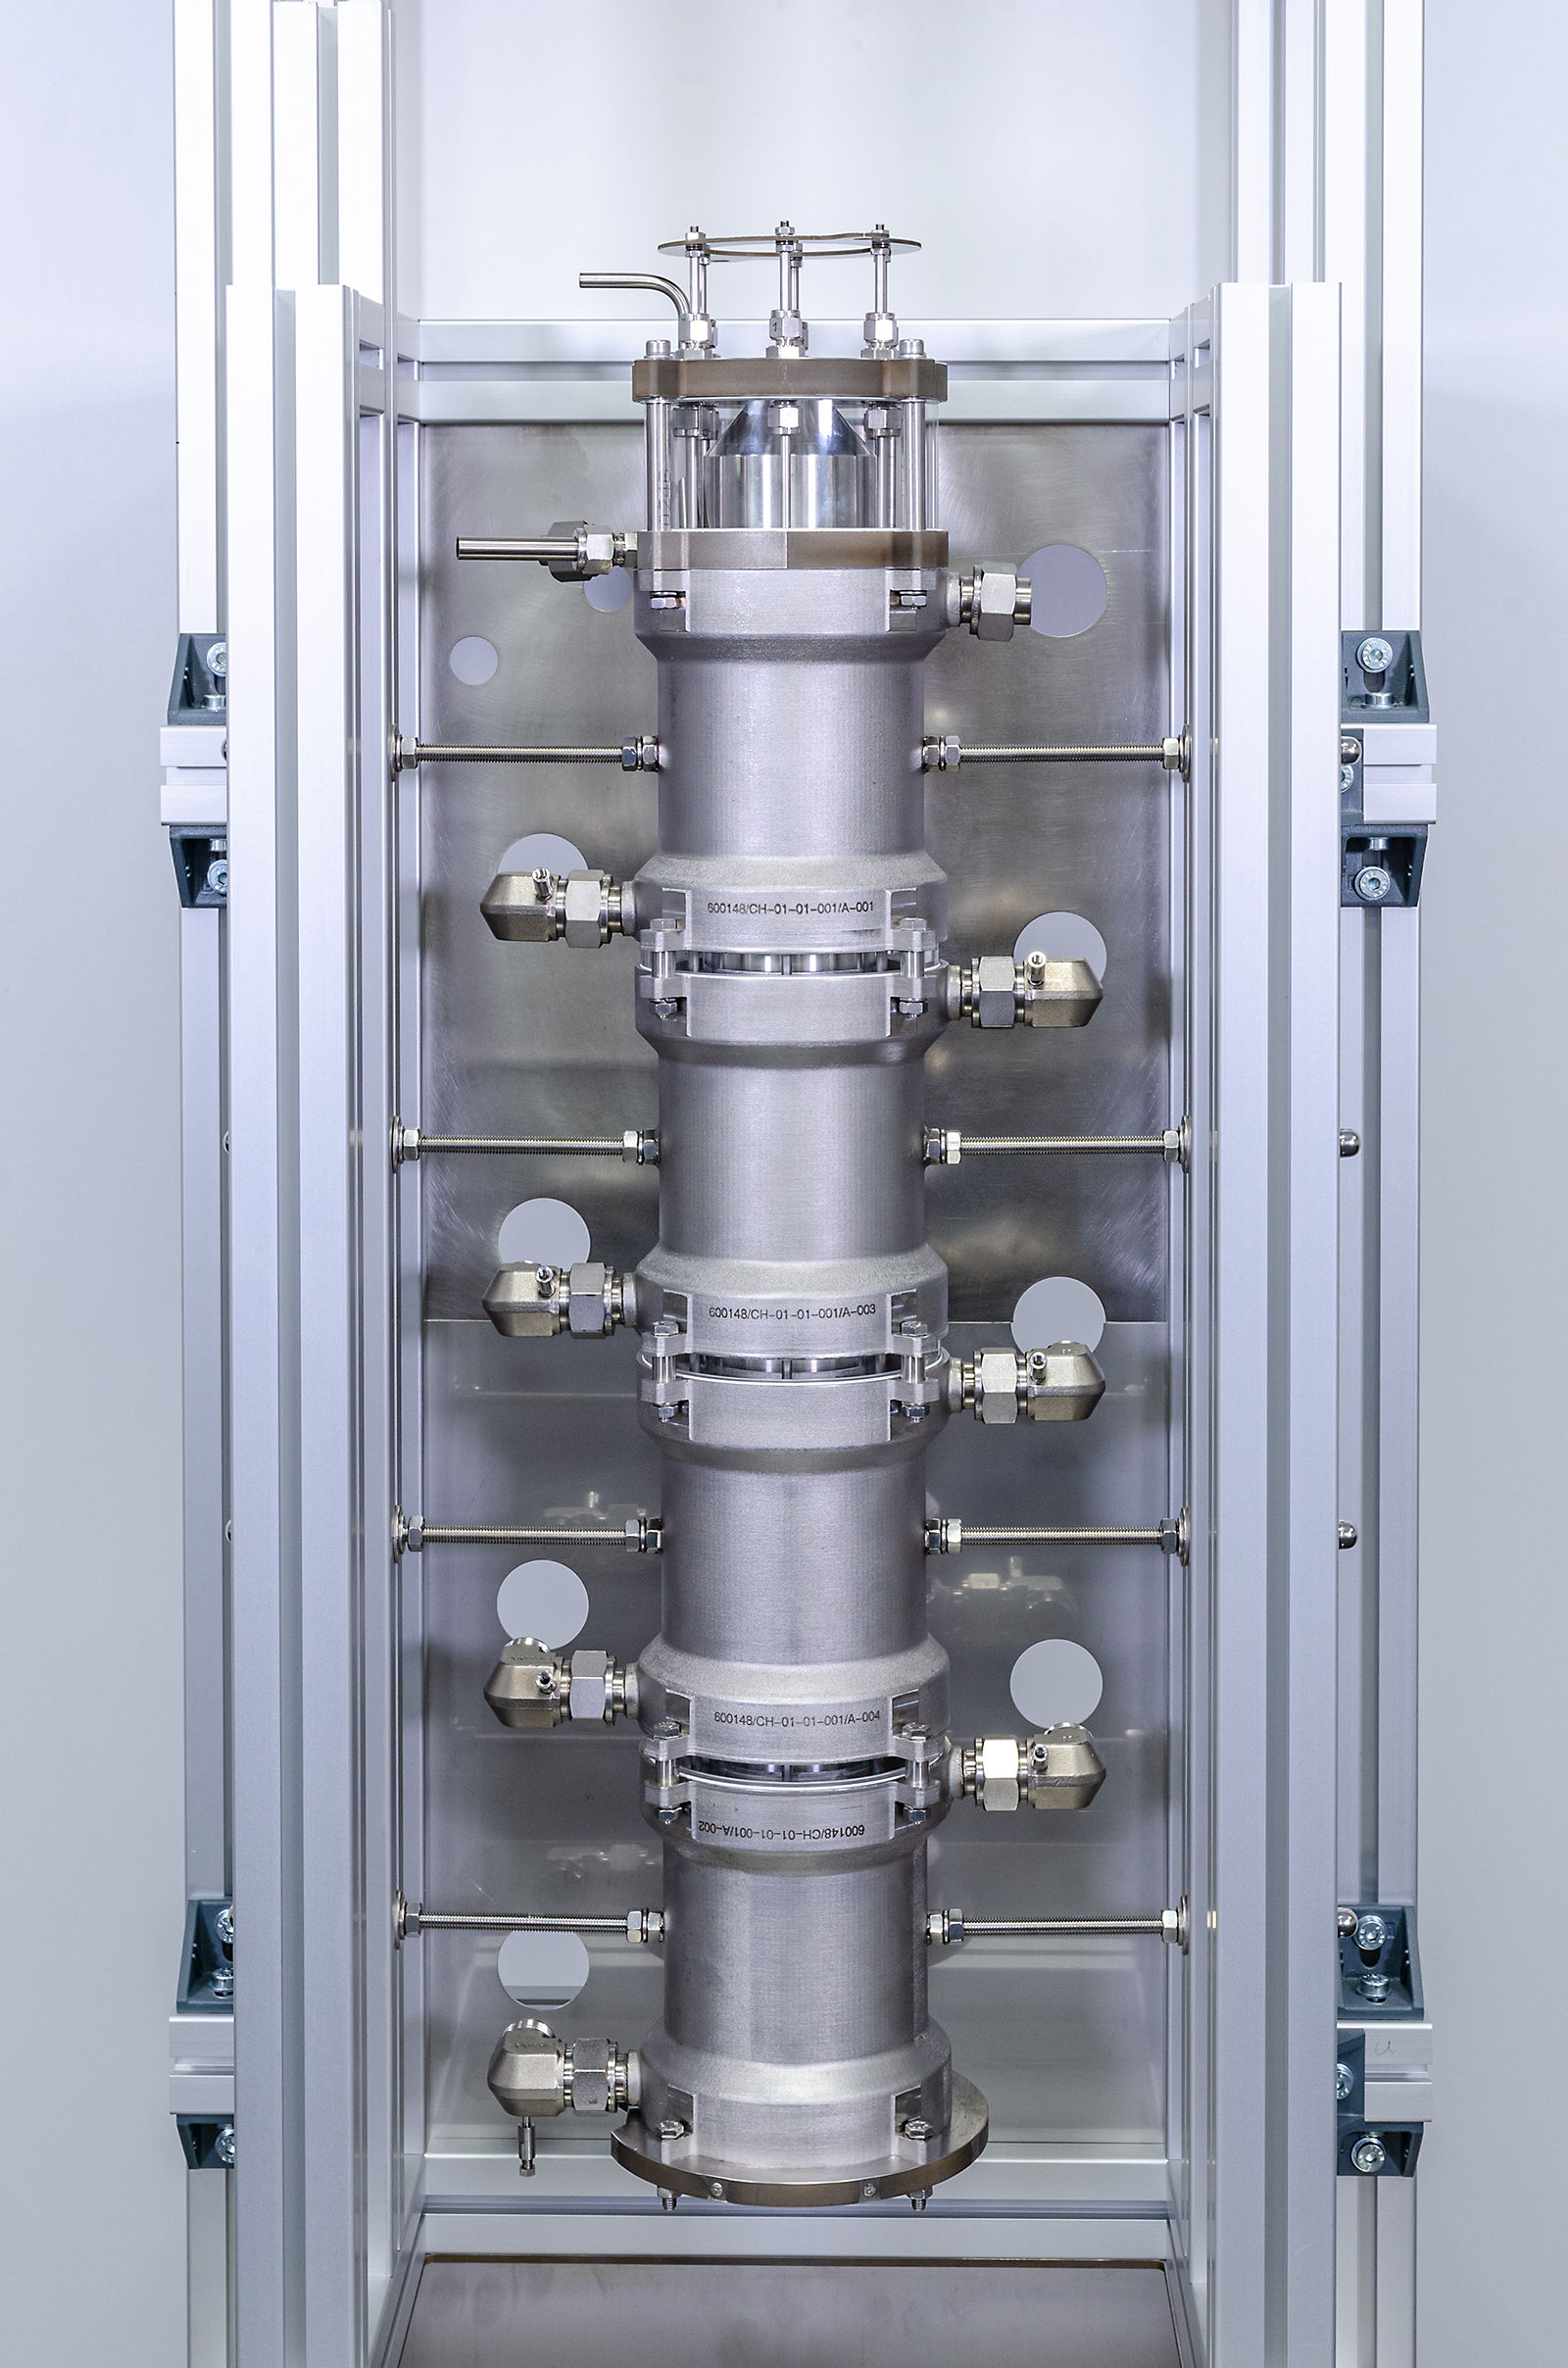 Modular pilot plant for synthesis with Grignard reagents, featuring a maxi-mum throughput of 20 L/h.